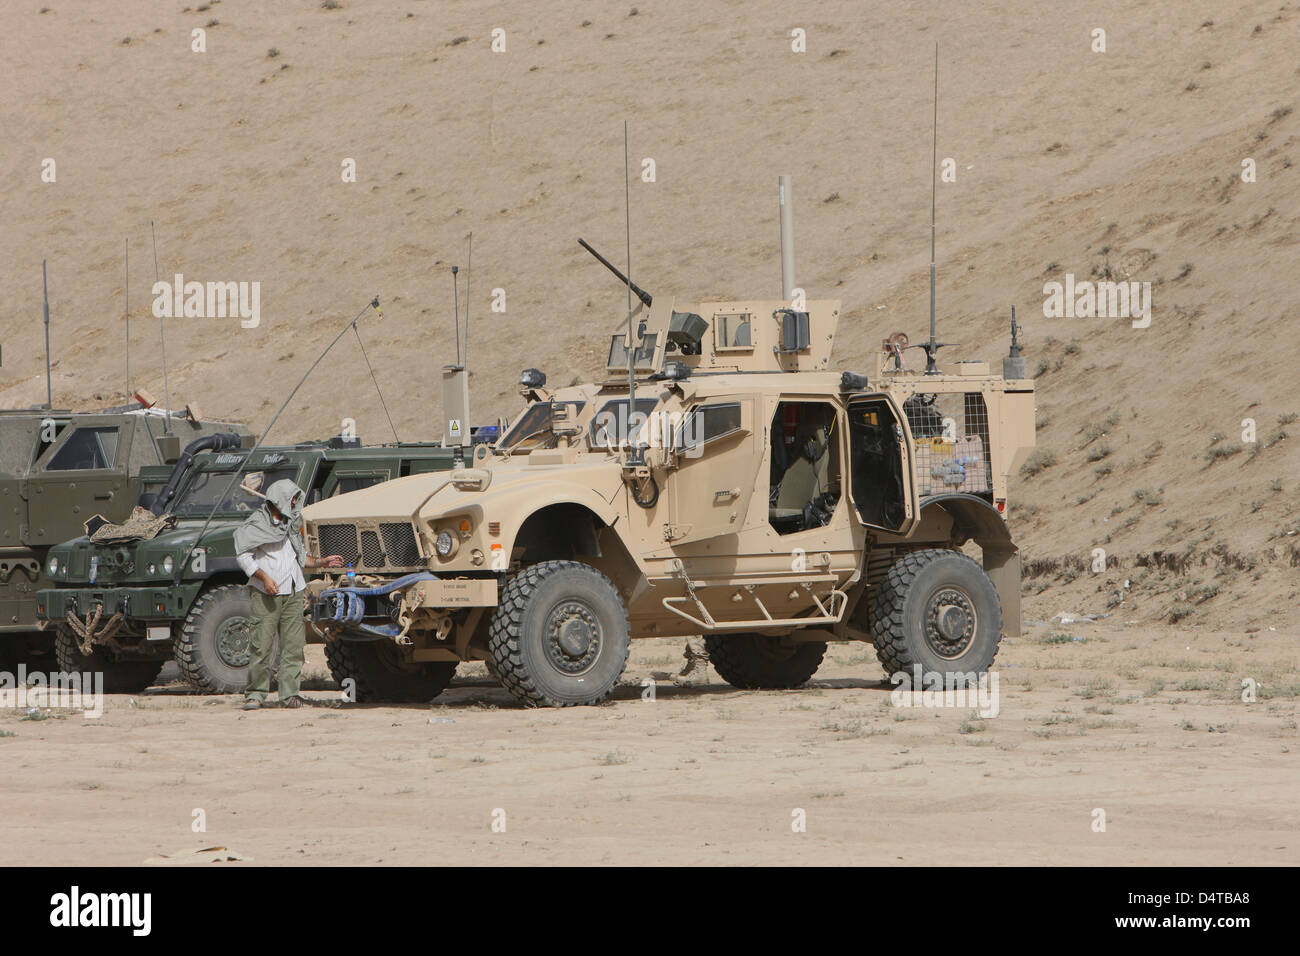 The Oshkosh M-ATV is an MRAP (Mine Resistant Ambush Protected) vehicle commonly found in Afghanistan. Stock Photo